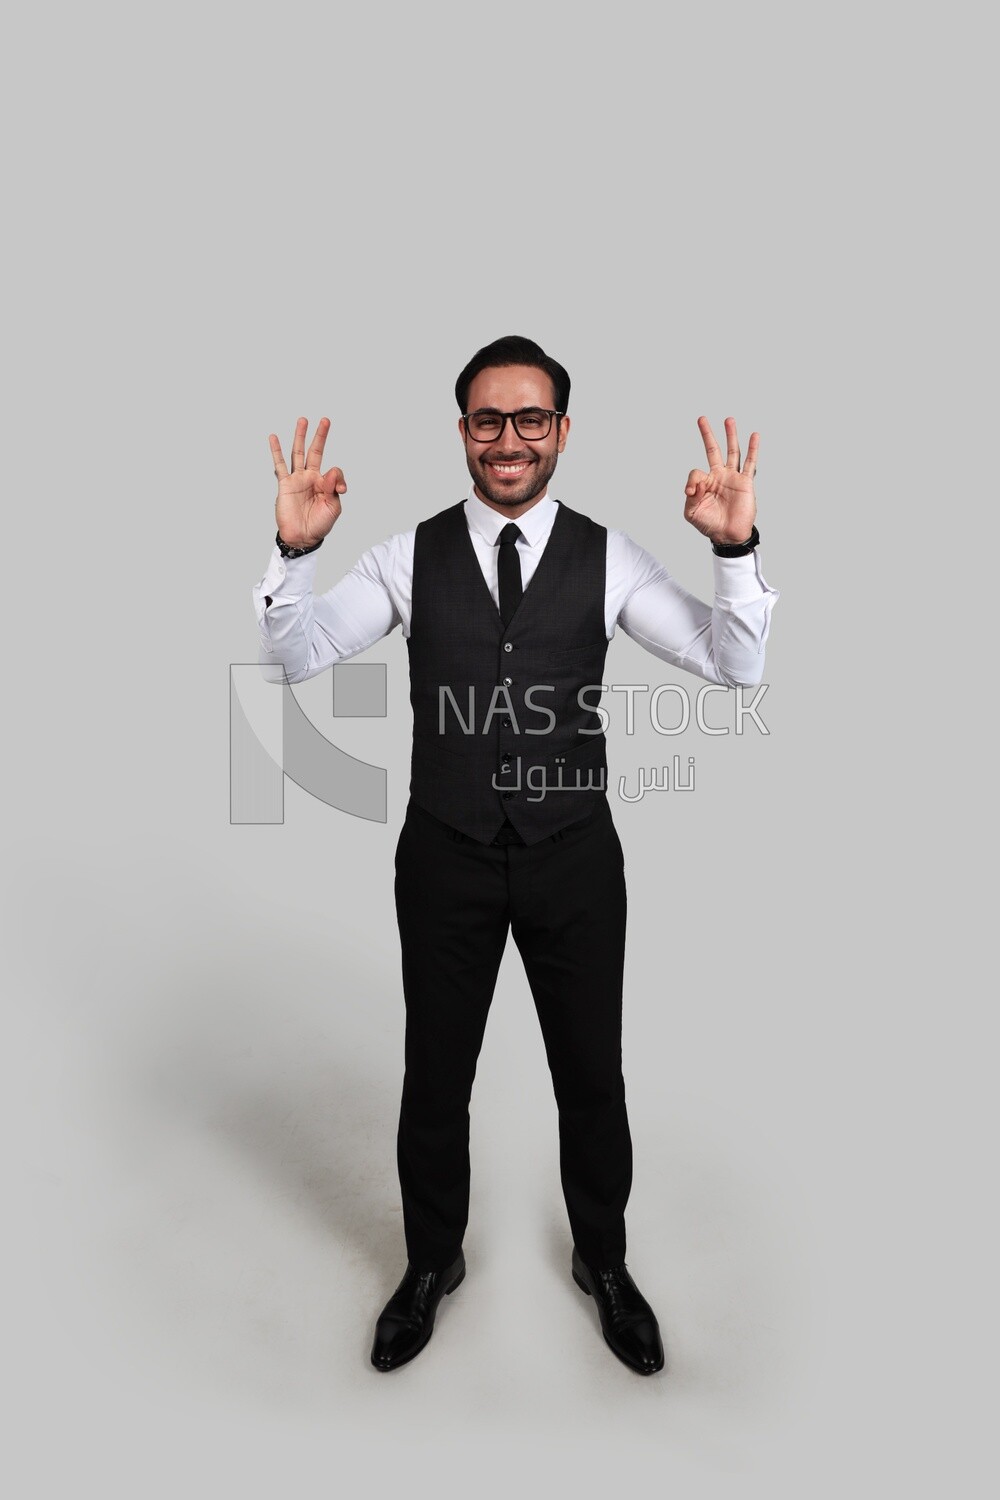 Photo of a businessman with a formal suit with hand gesture, business development and partnerships, business meeting, Model